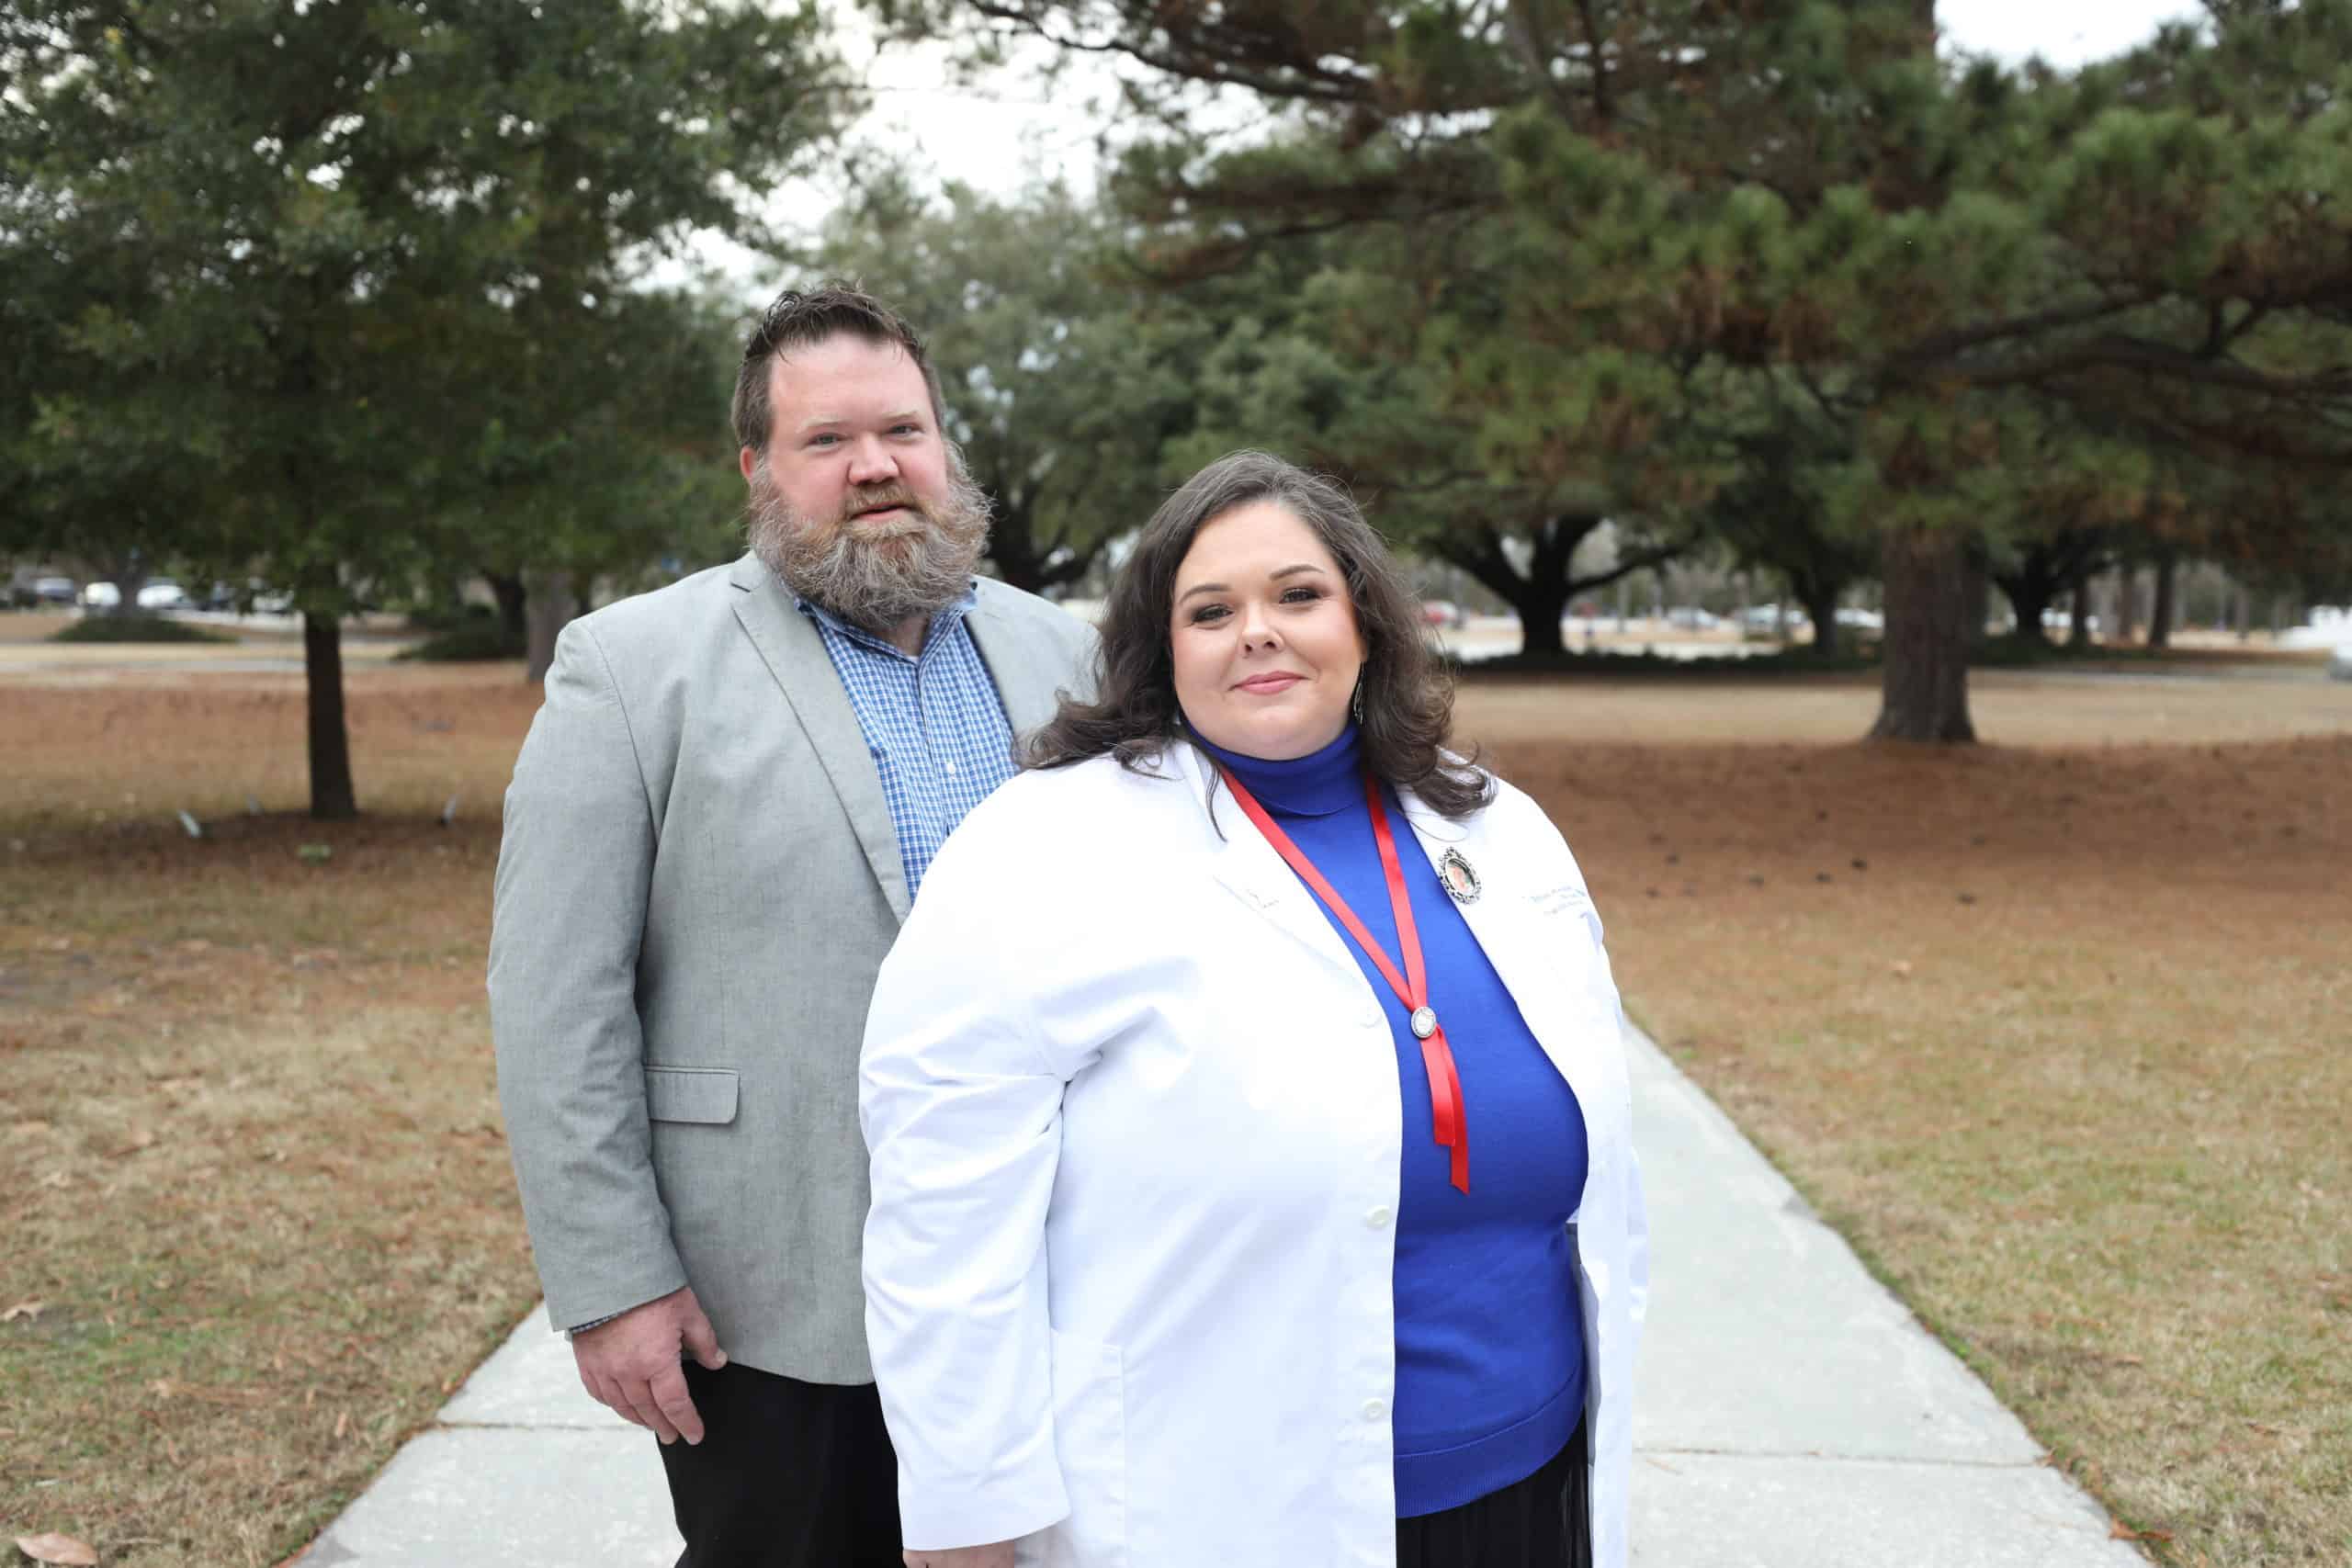 Ready to give back, ‘Momma Jennie’ gets her nursing diploma from FMU